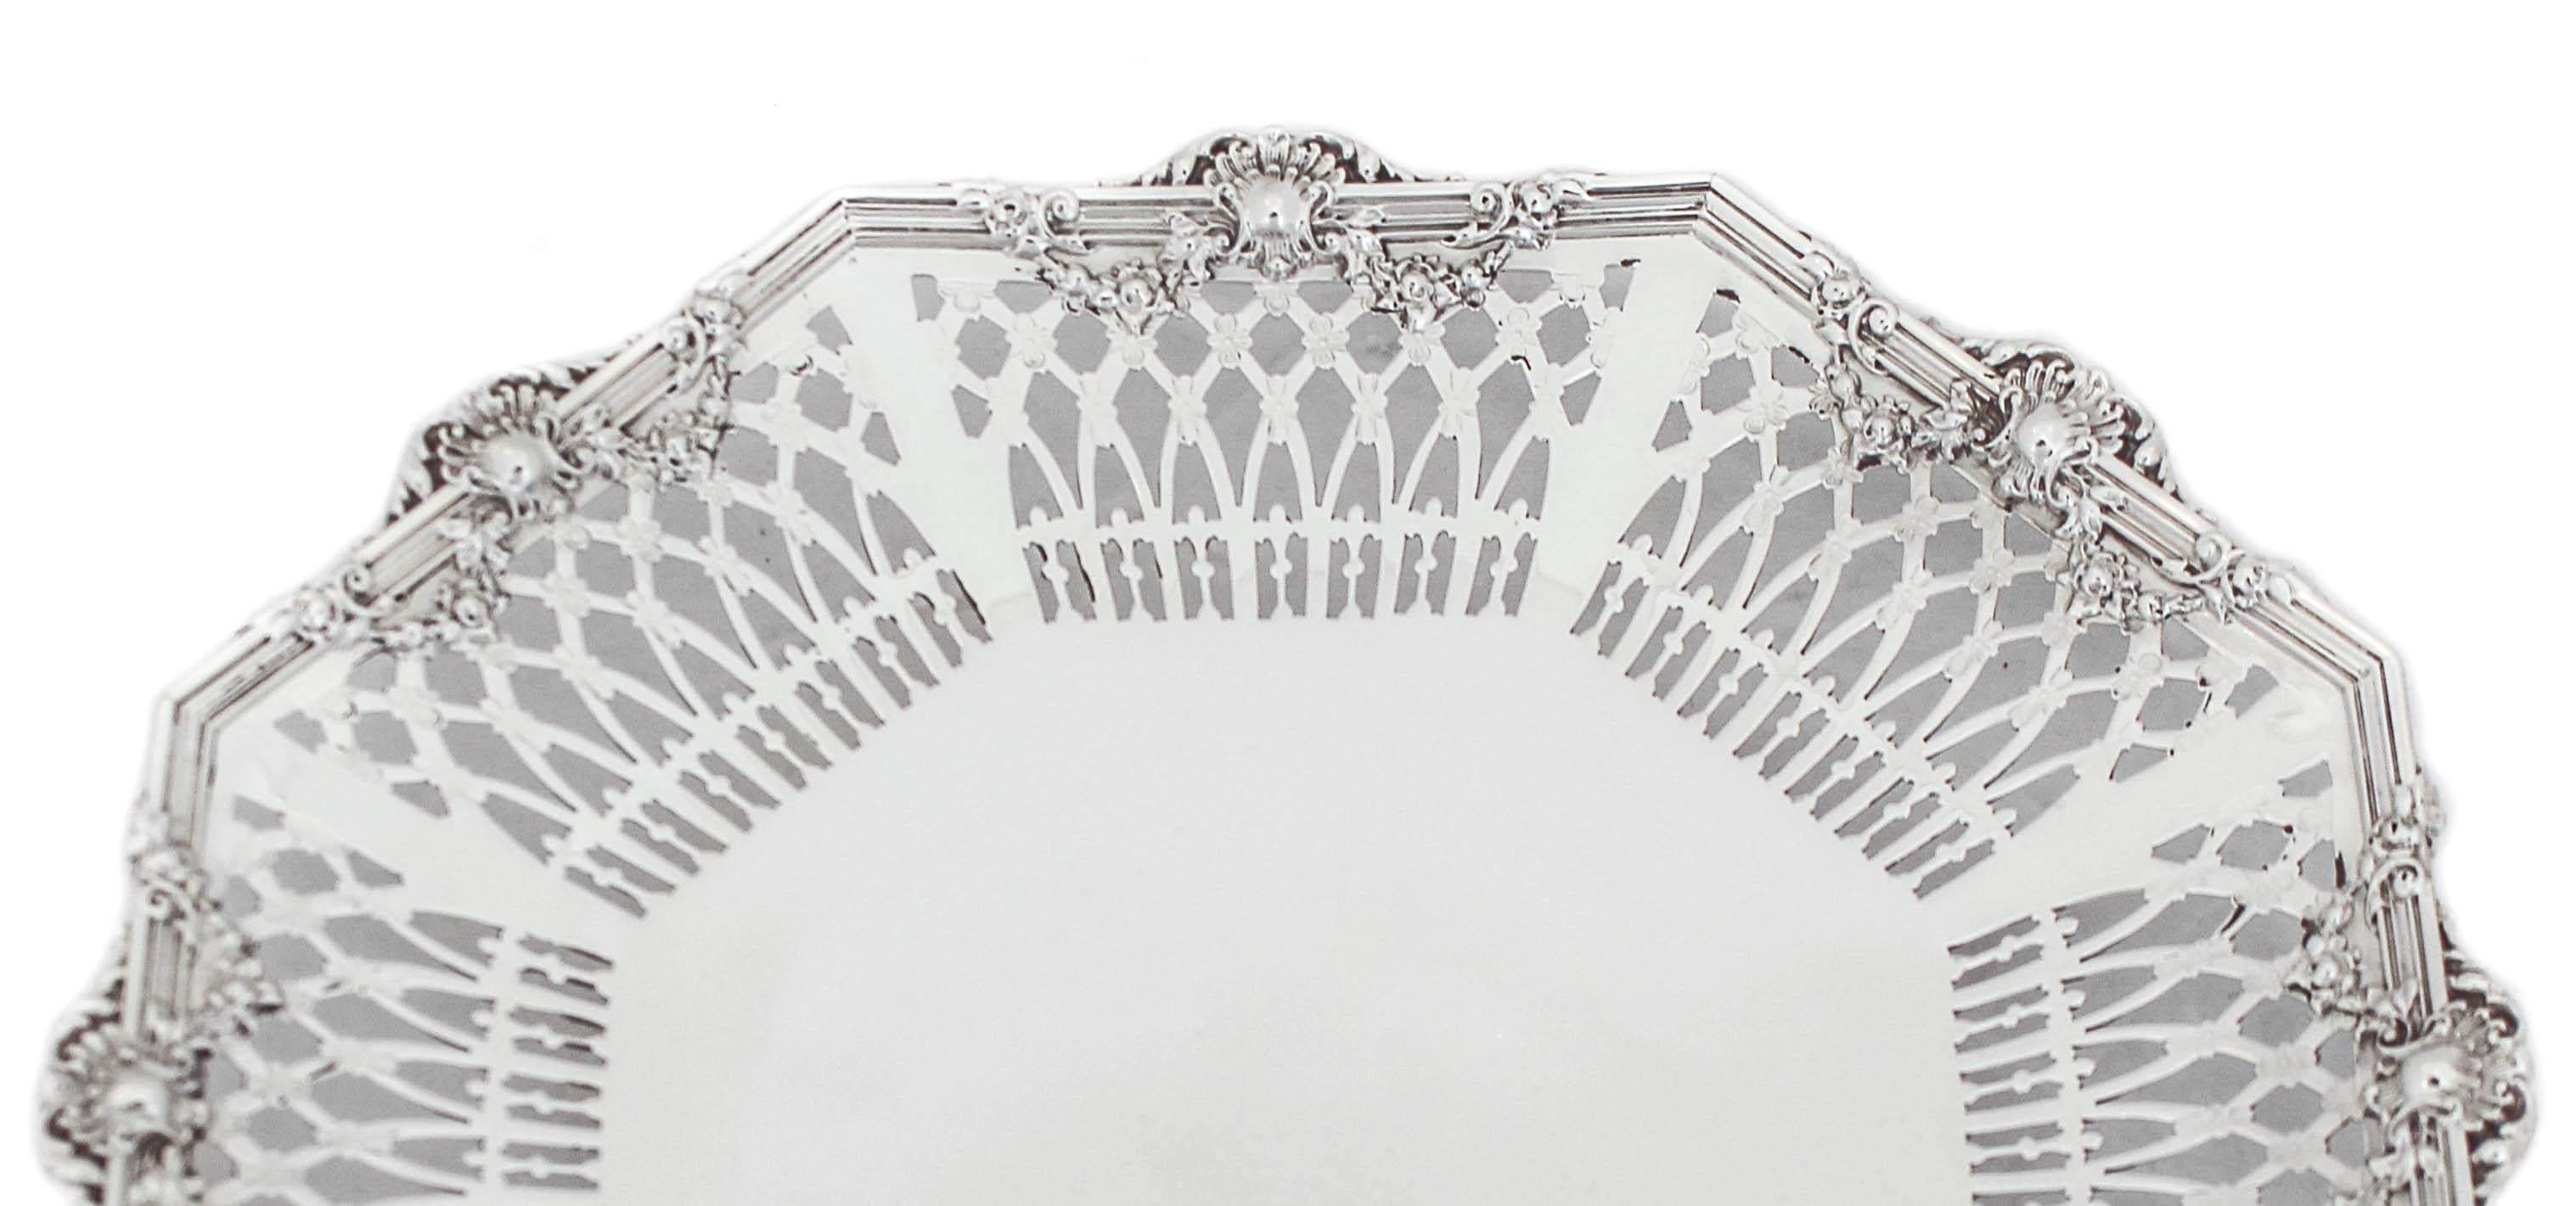 This beautiful sterling silver tray has a reticulated border and a fluted rim. It has a pedestal so it’s propped off the surface. It is an octagon shaped tray with wreaths and floral motifs around the sides. A piece of old-world workmanship at its